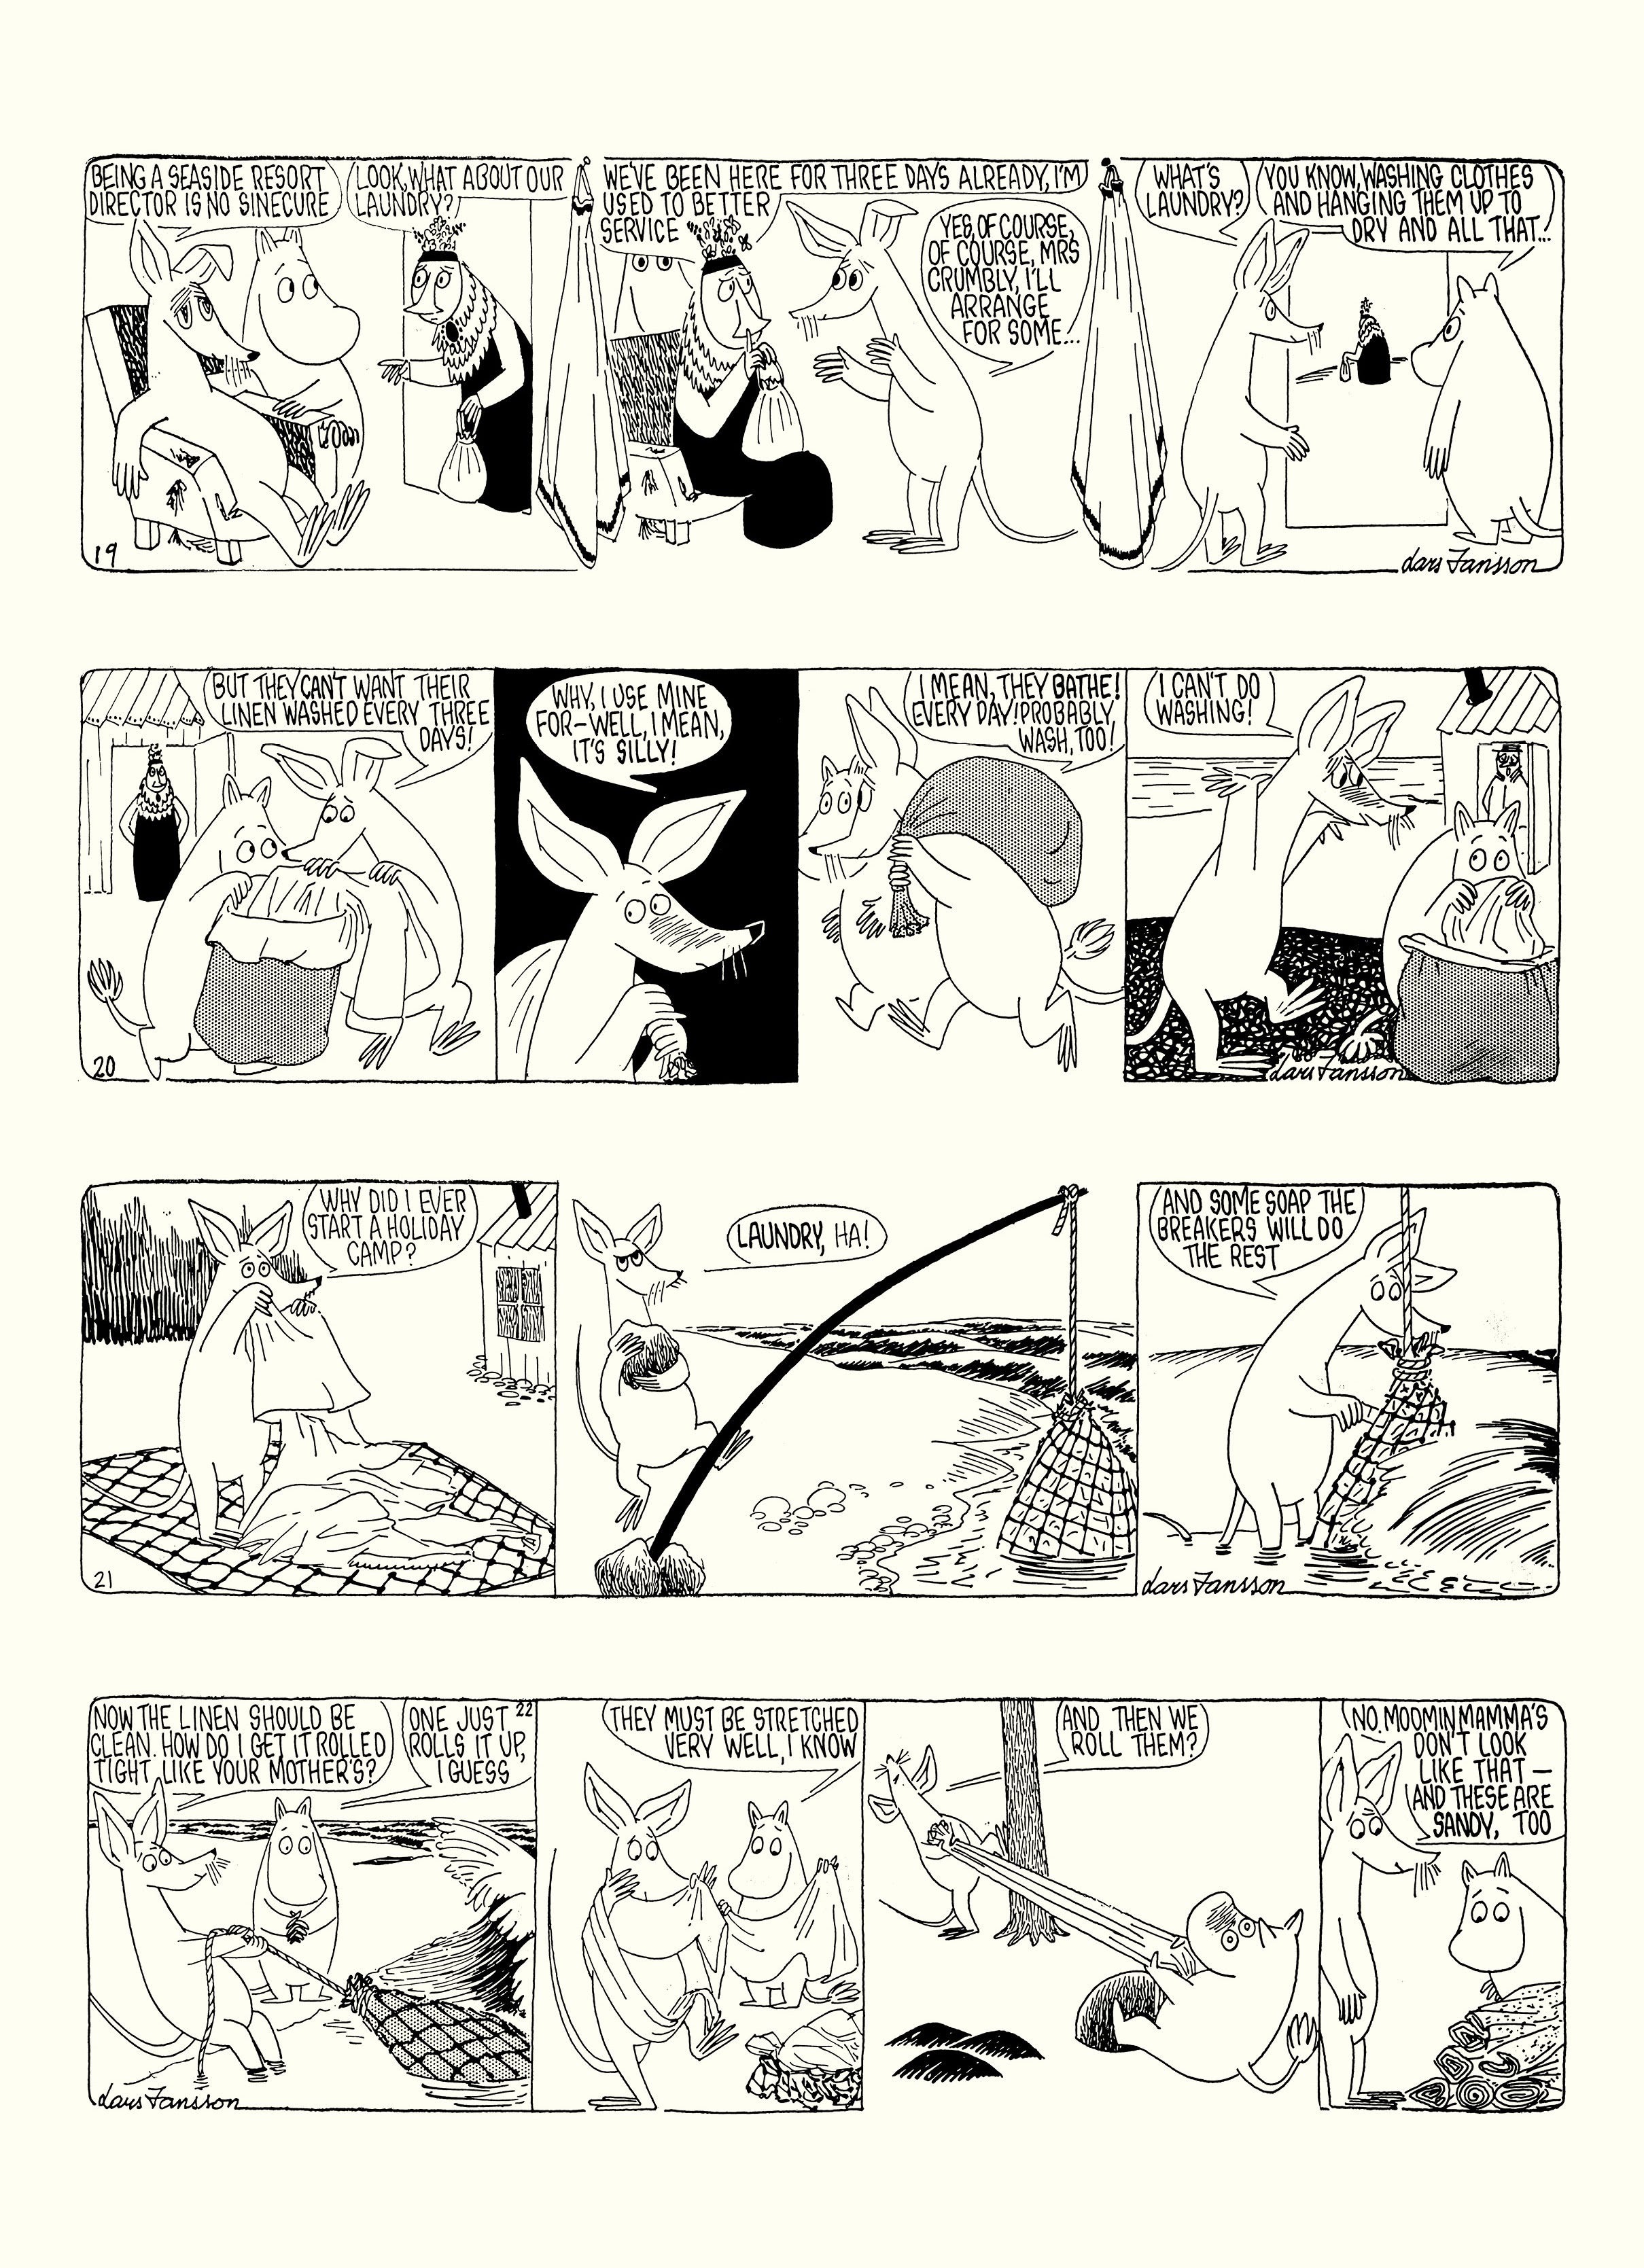 Read online Moomin: The Complete Lars Jansson Comic Strip comic -  Issue # TPB 8 - 56